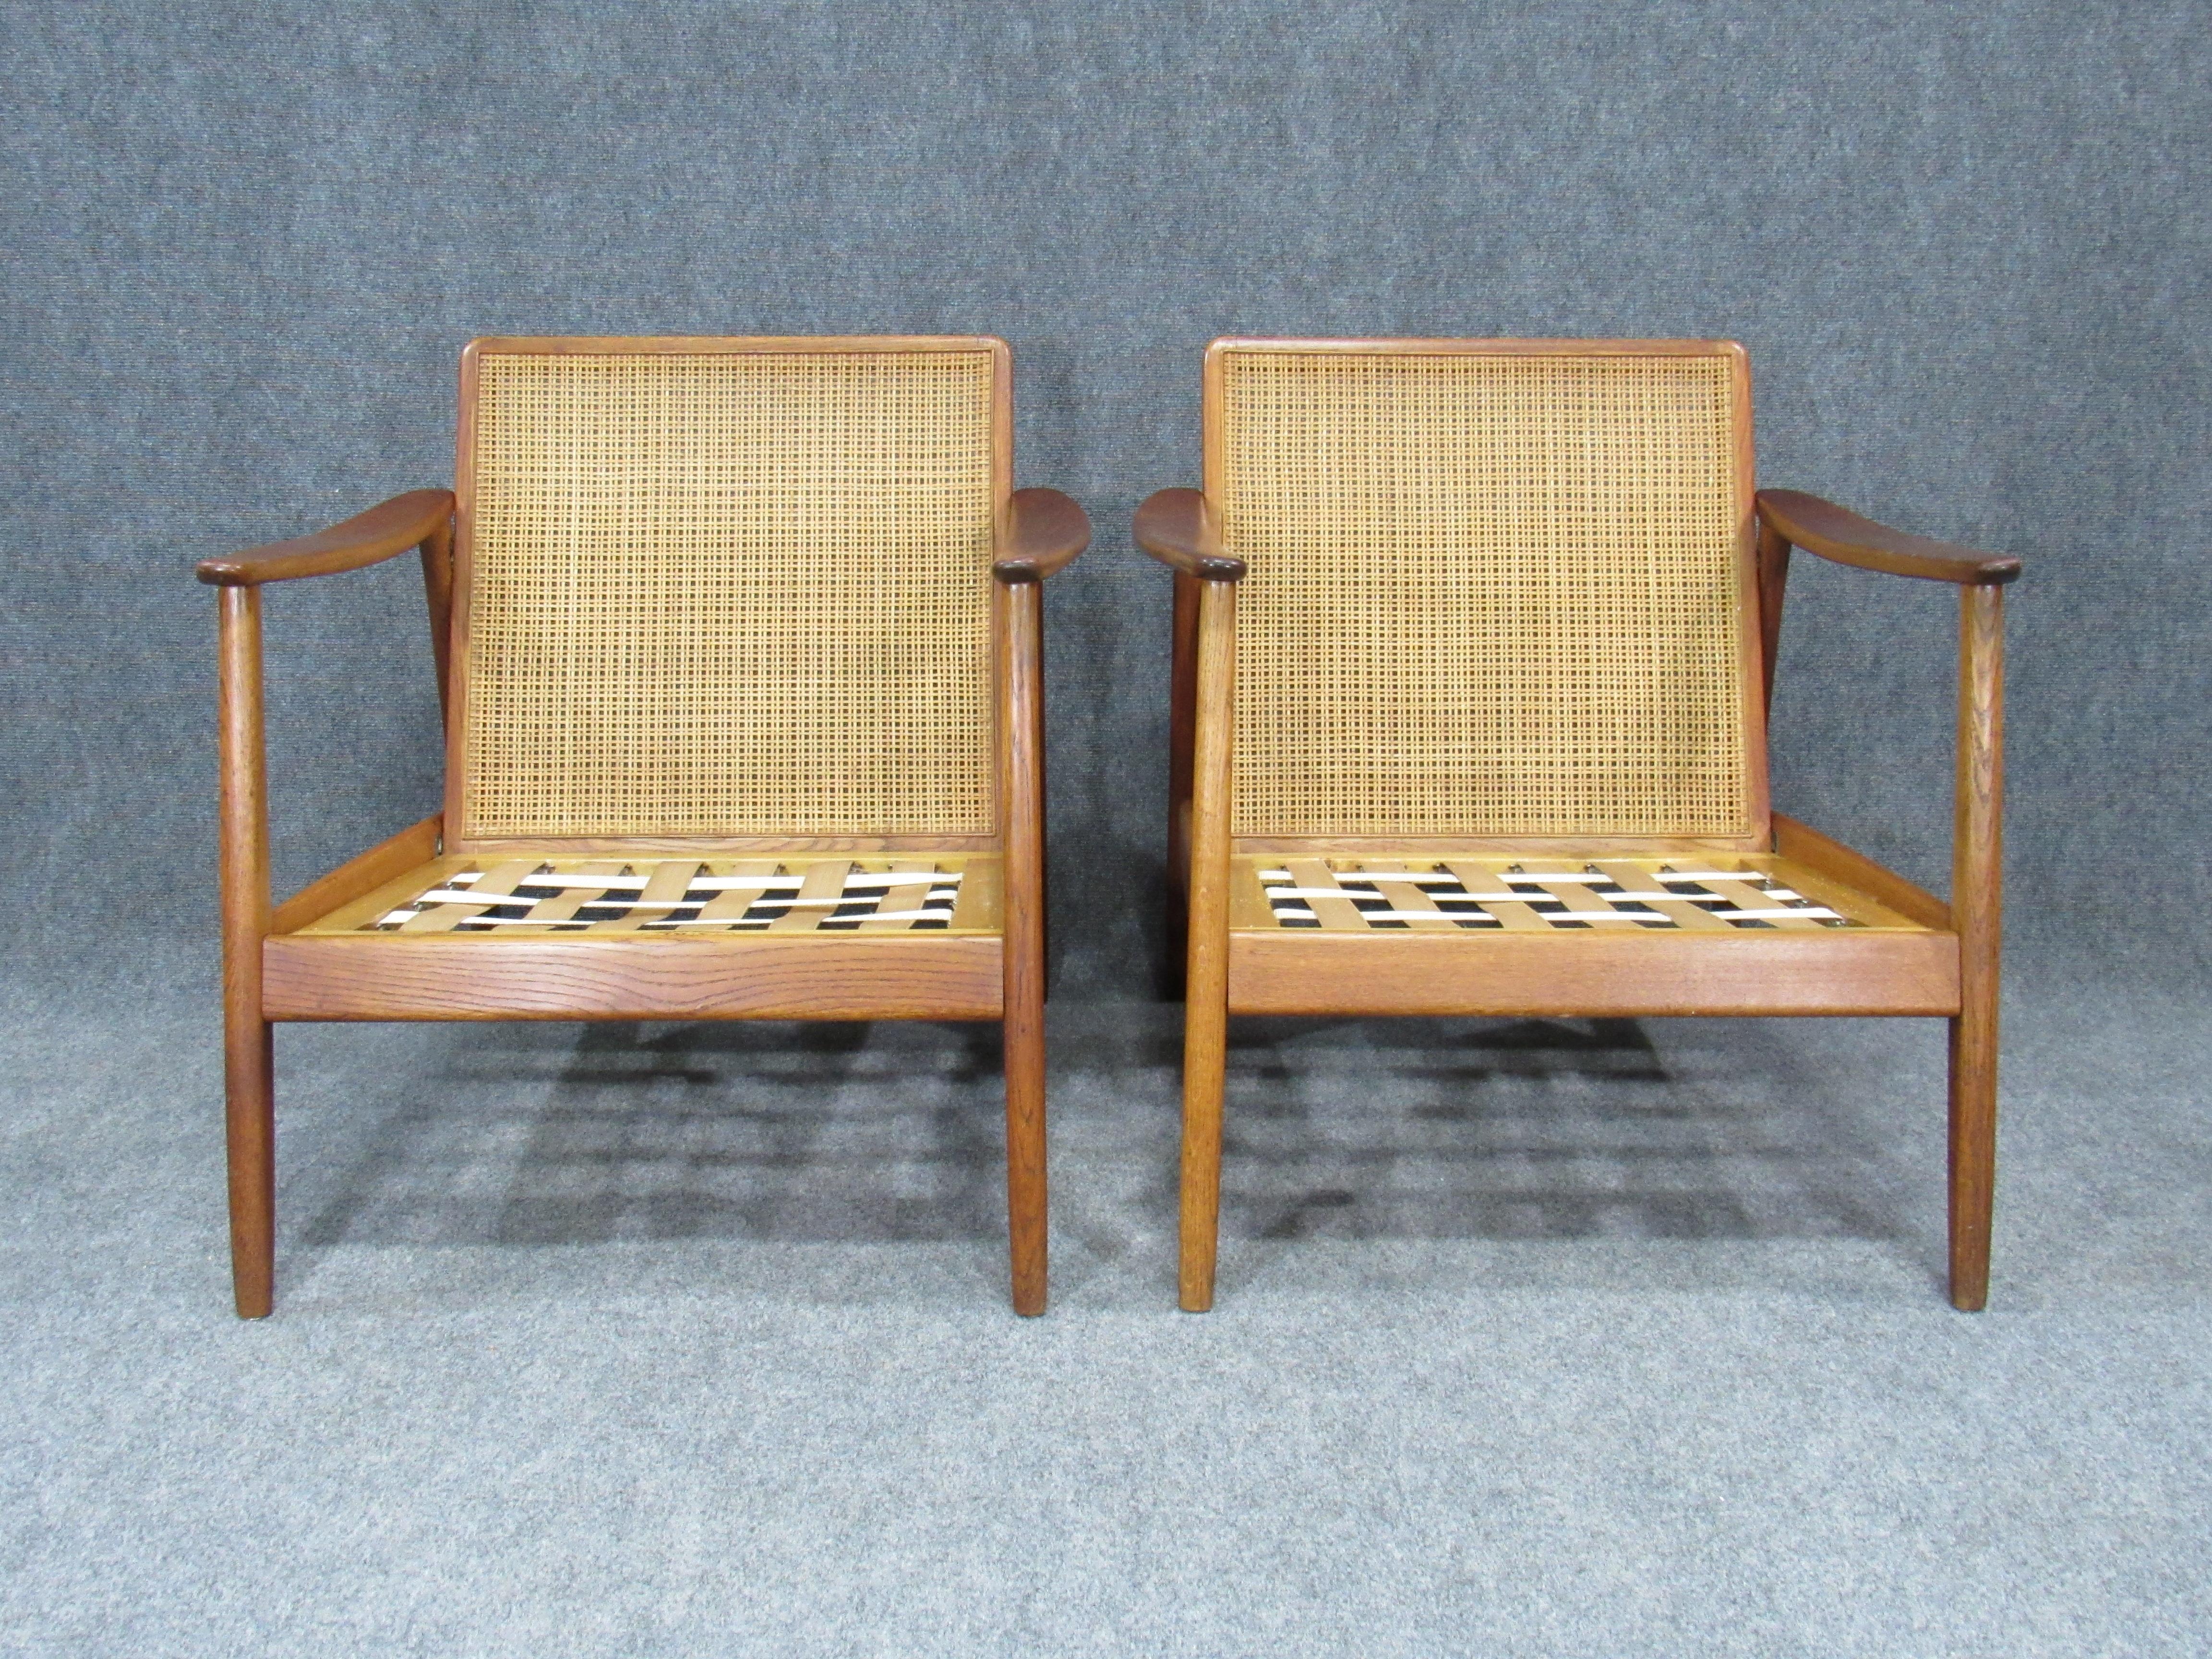 Swedish modern Folke Ohlsson lounge teak arm chair with cane backrest for Dux. Made in Sweden in the 1950s. Does not come with cushions. Seat height listed without cushions.